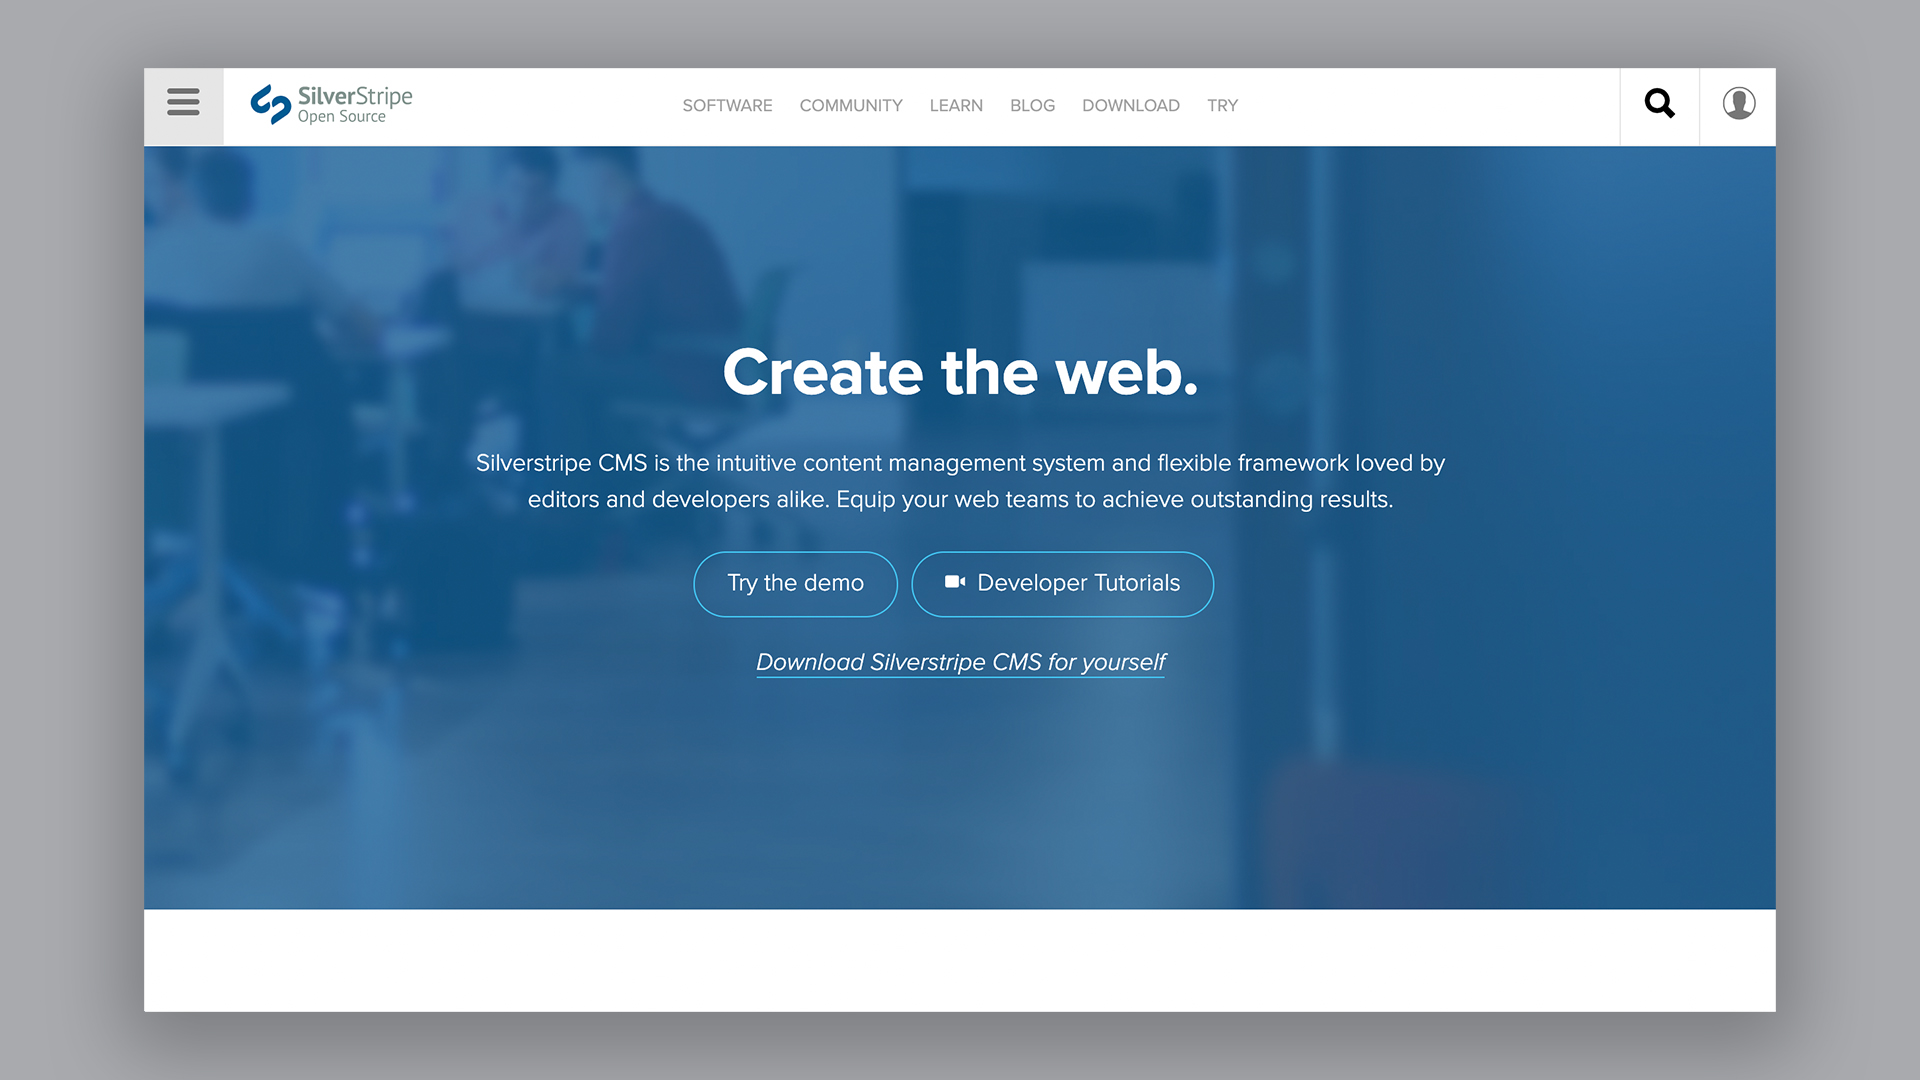 Homepage of SilverStripe, one of the best blogging platforms, with the headline 'Create the web'